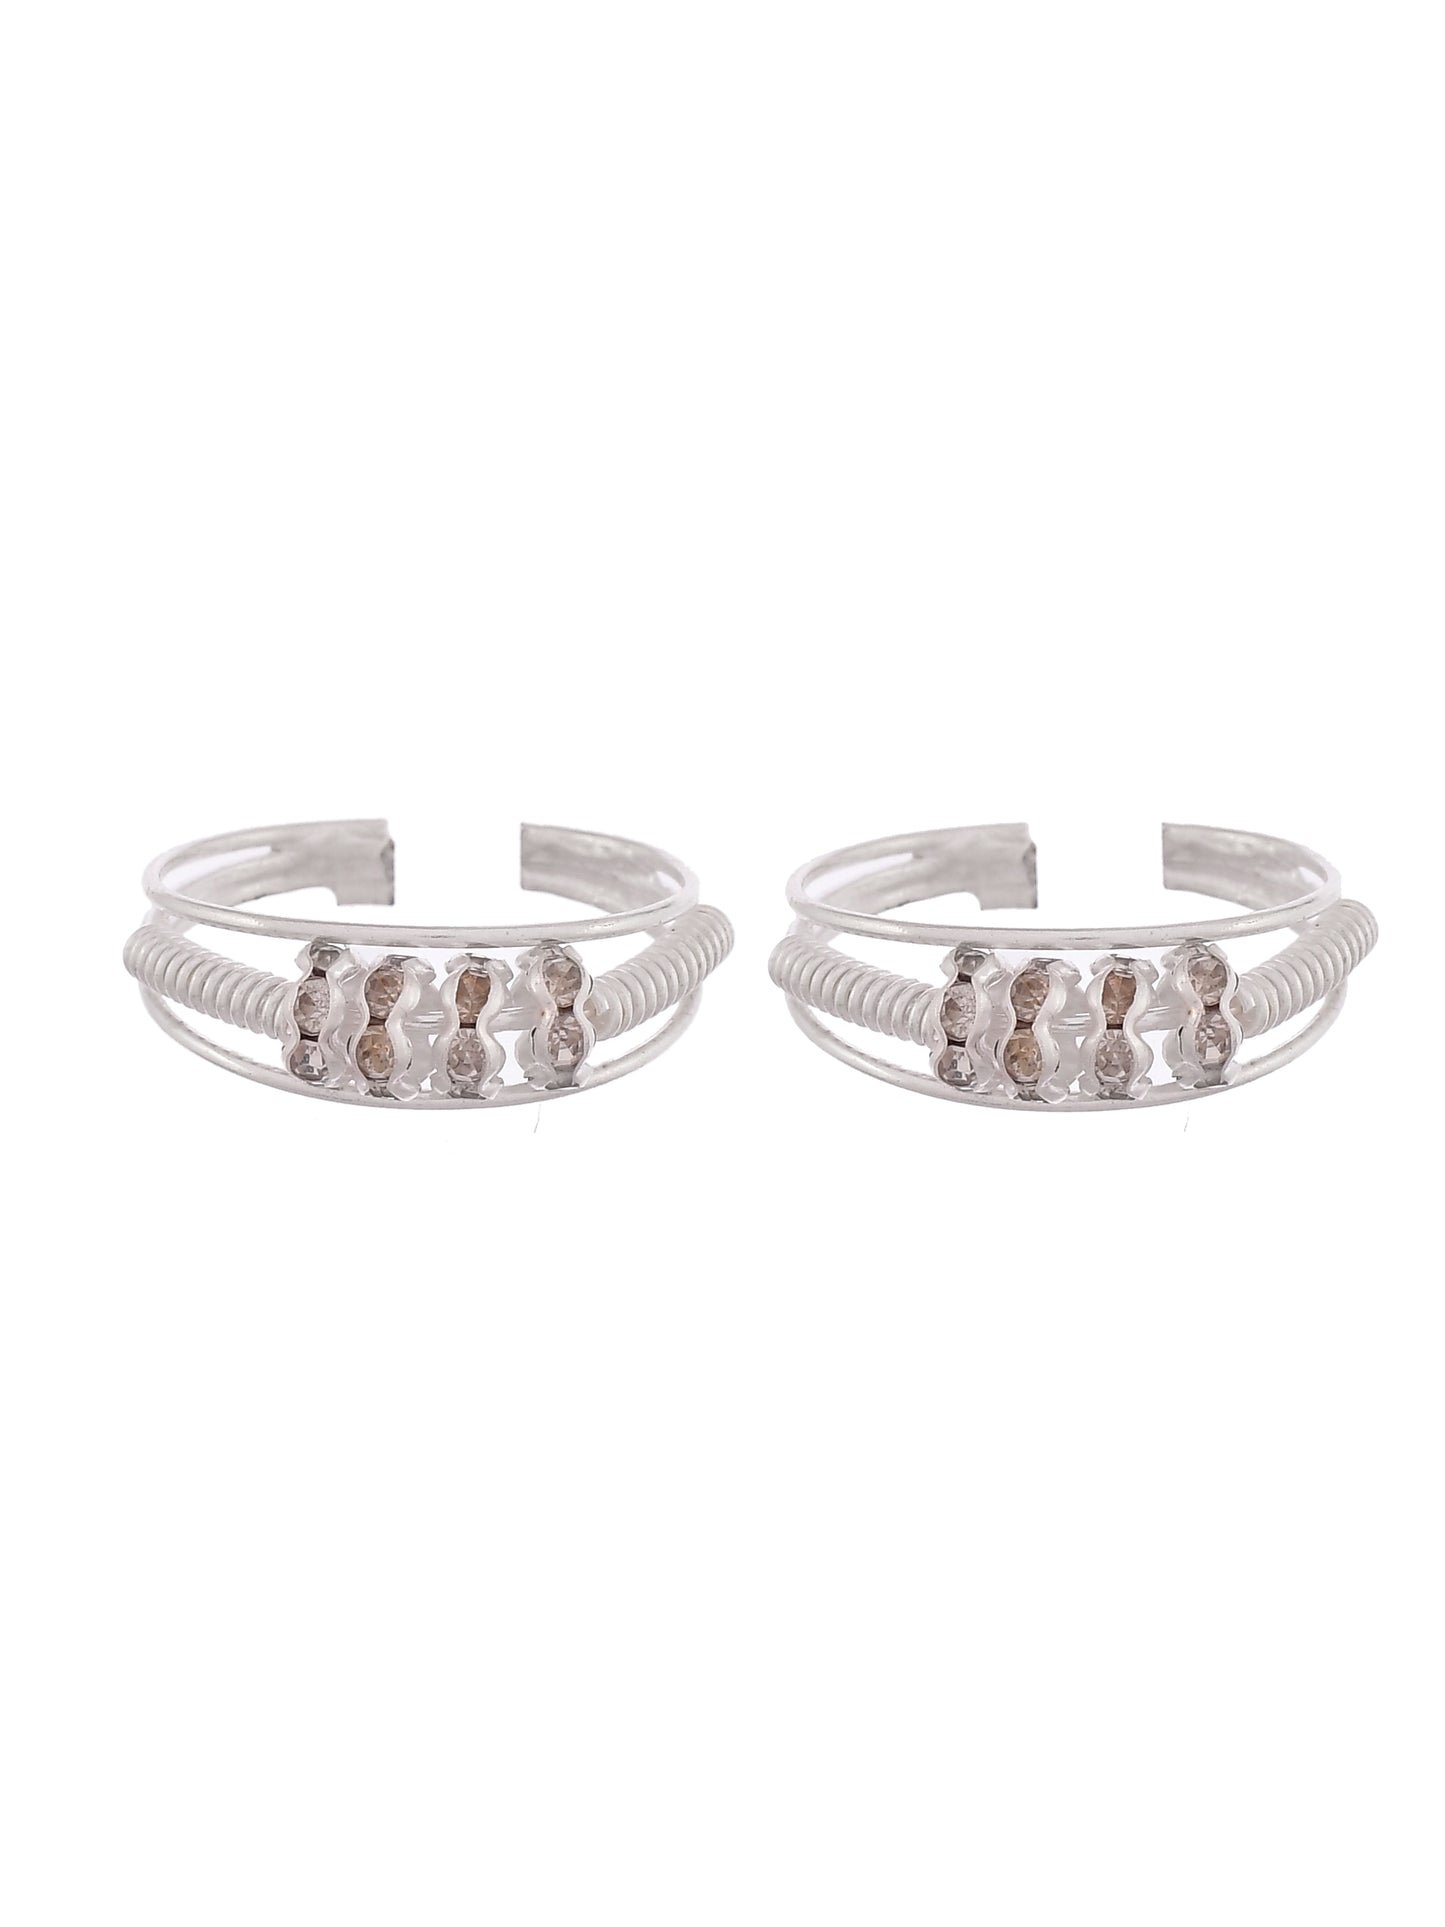 Set Of 4 Silver-Plated Toe Ring